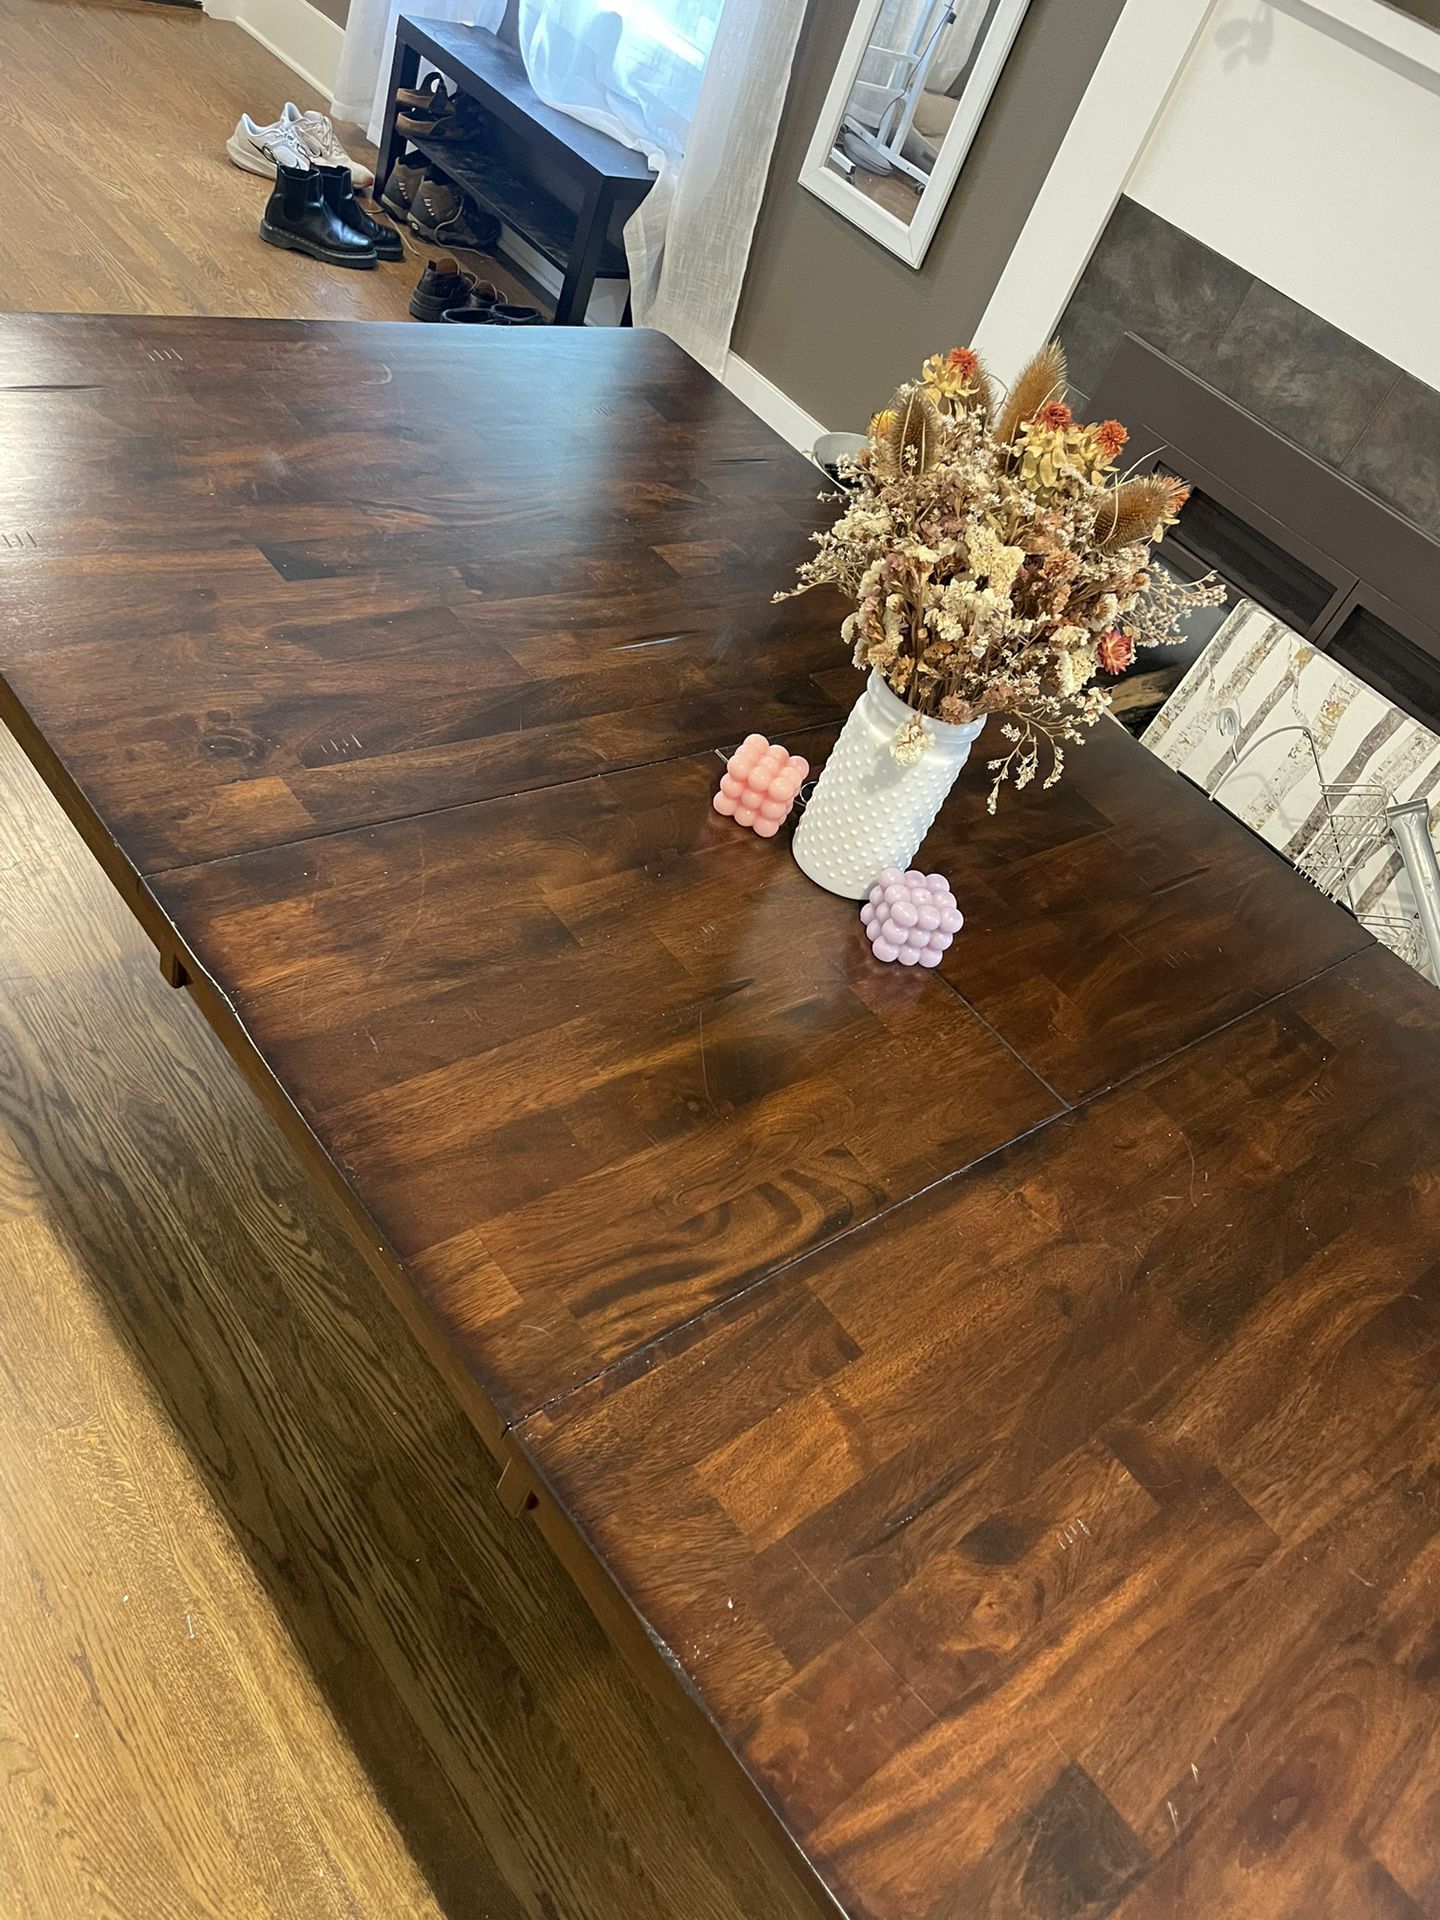 Wooden Dining Table with Leaf